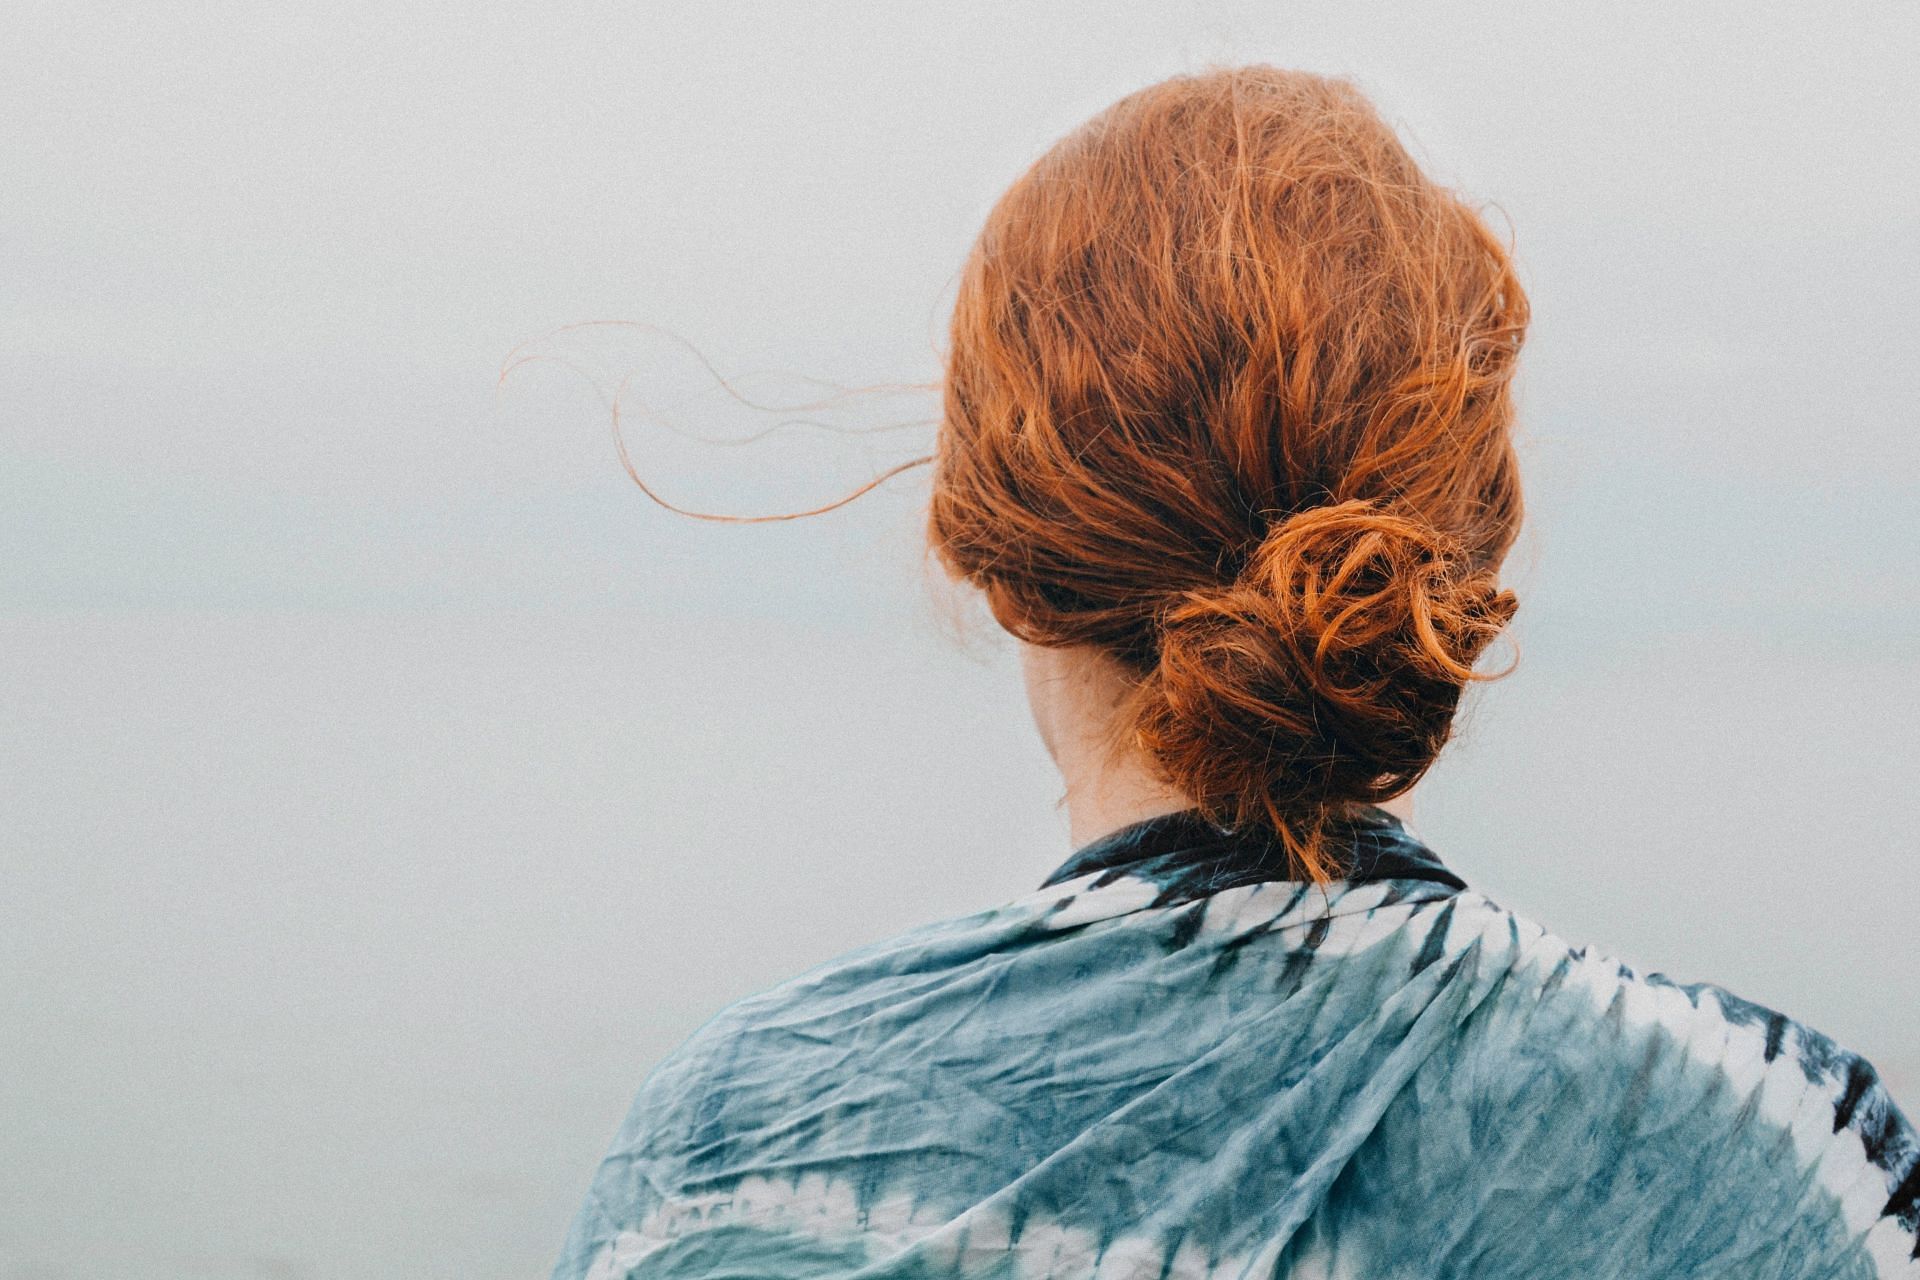 An itchy scalp, also known as scalp pruritus, is quite common. (Image via Unsplash/ Tyler McRobert)